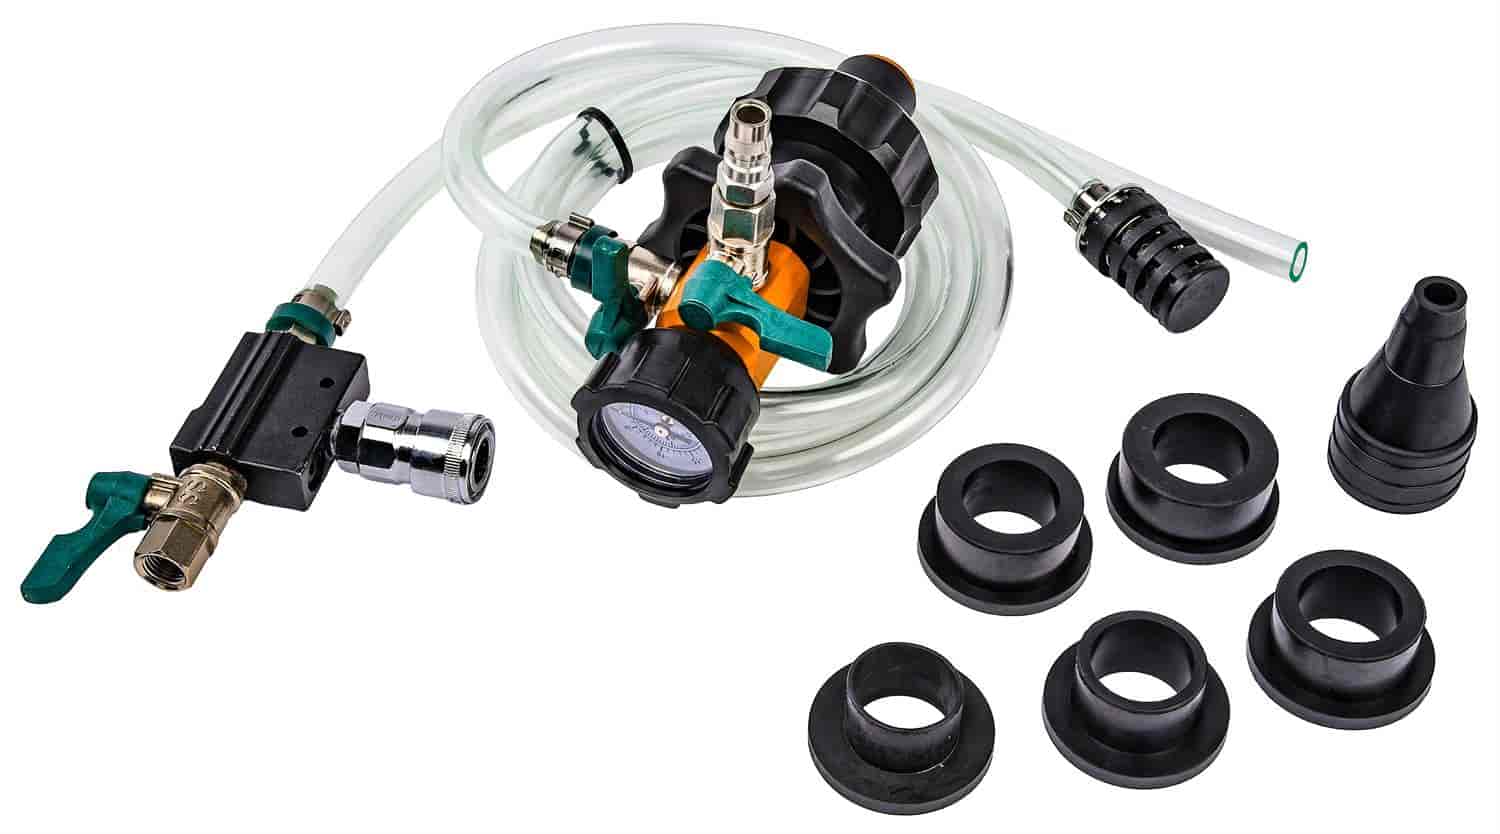 Cooling System Refiller and Air Evacuation Kit